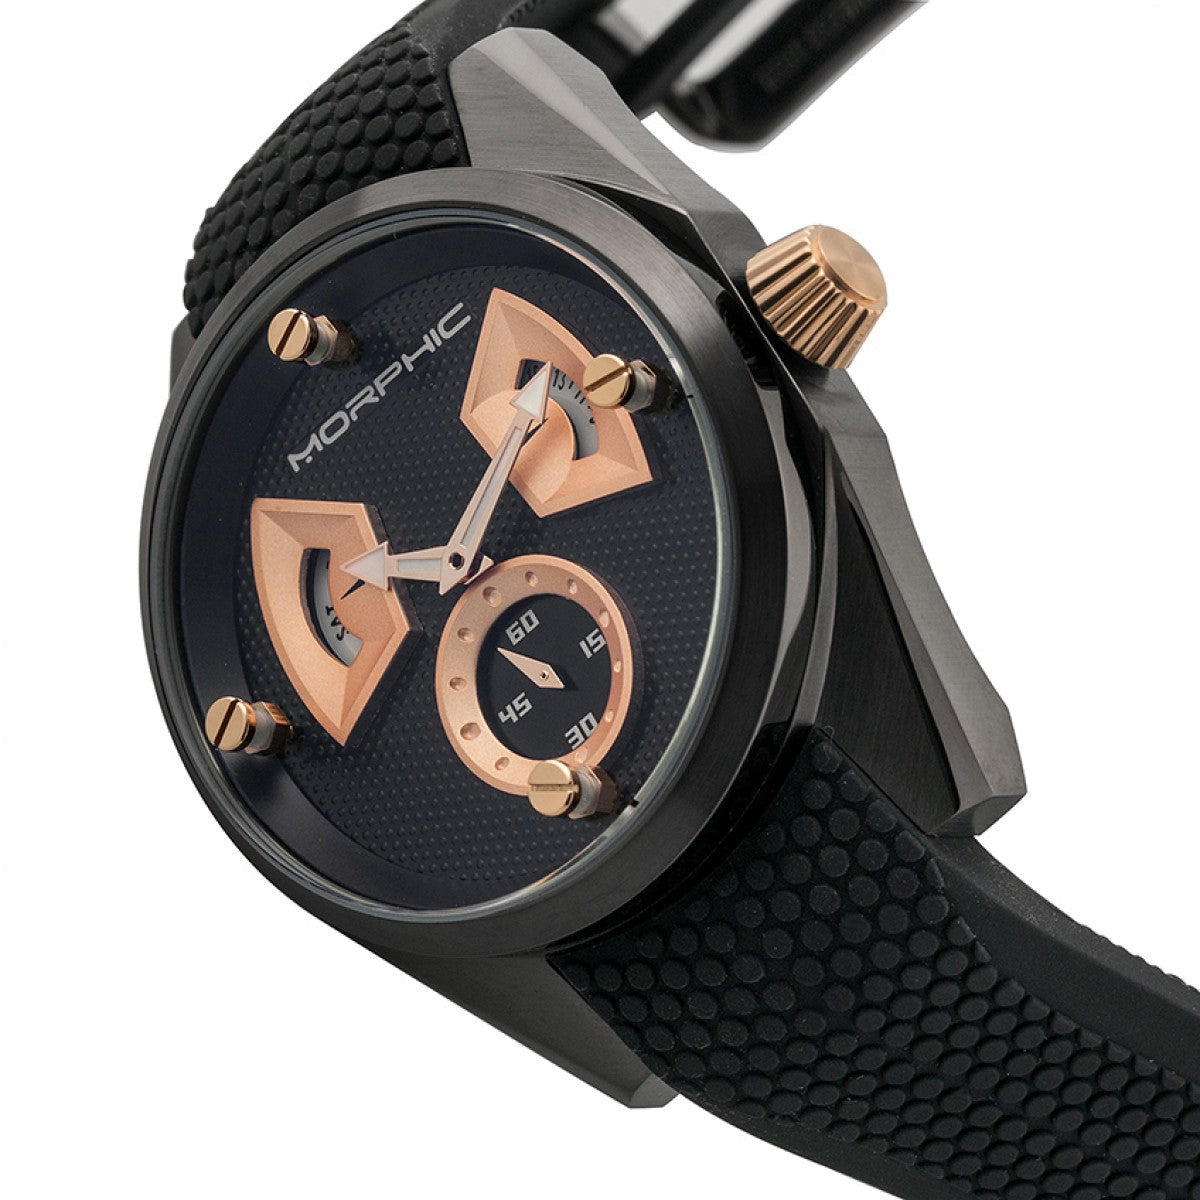 Morphic M34 Series Men's Watch w/ Day/Date - Black/Rose Gold - MPH3407